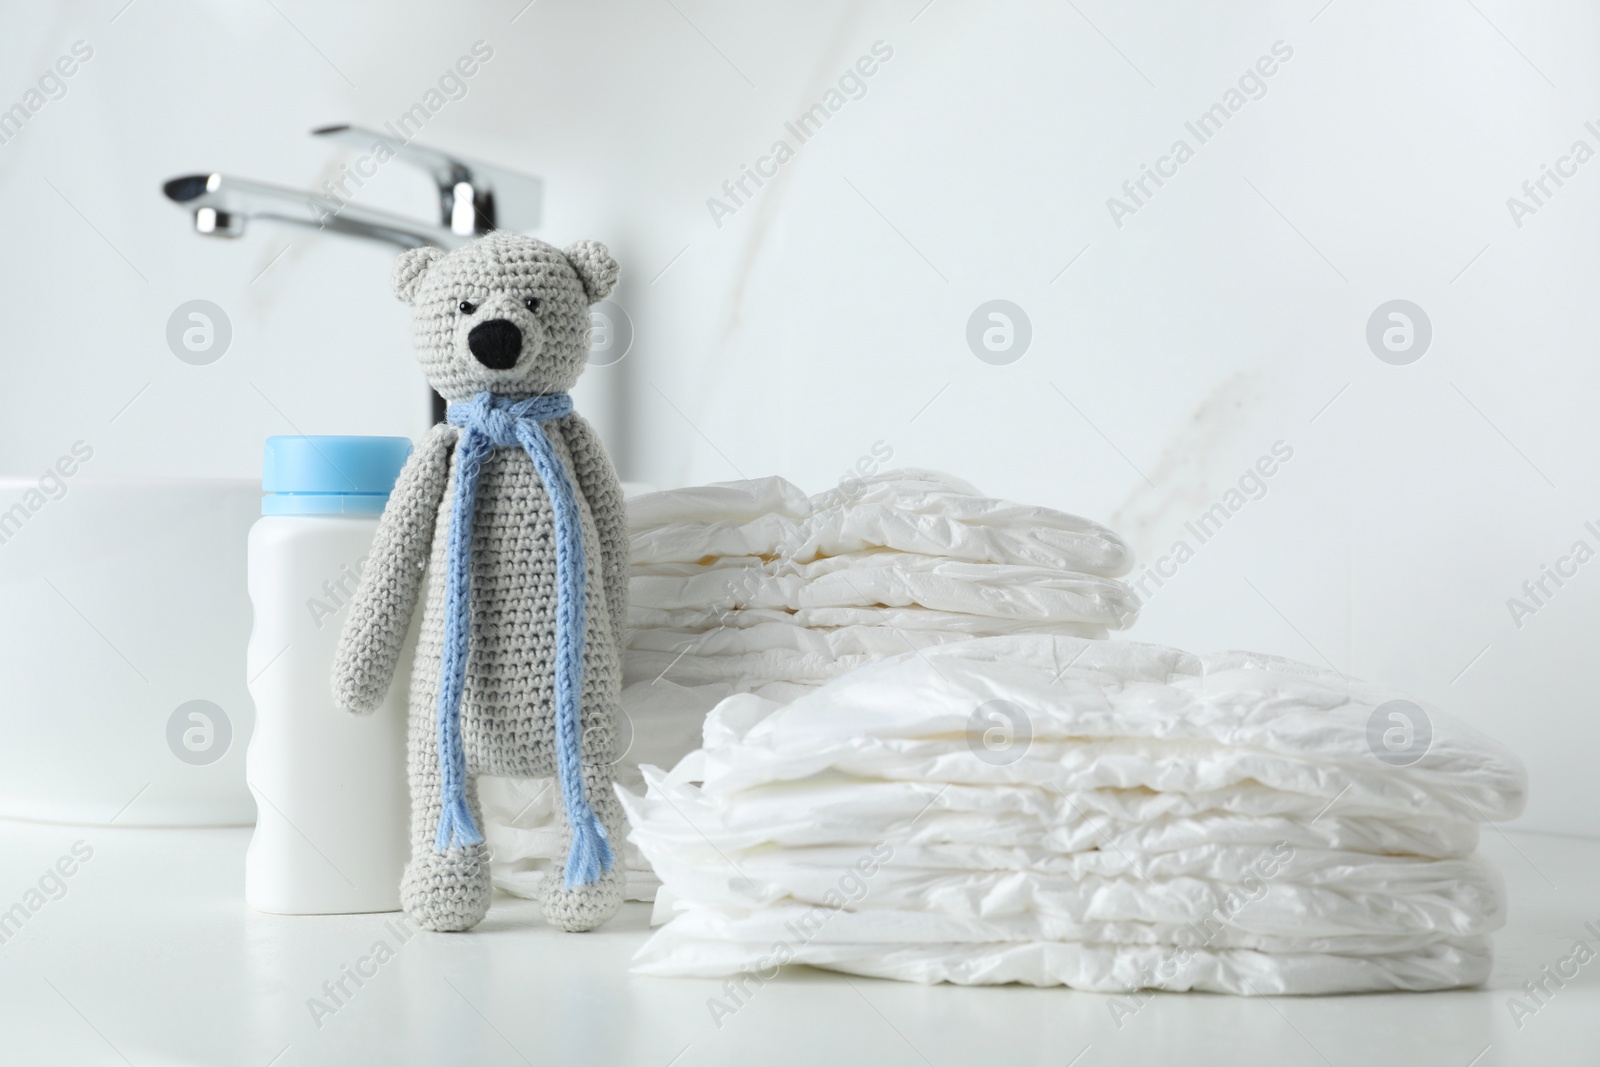 Photo of Stacks of diapers and toy bear on counter in bathroom